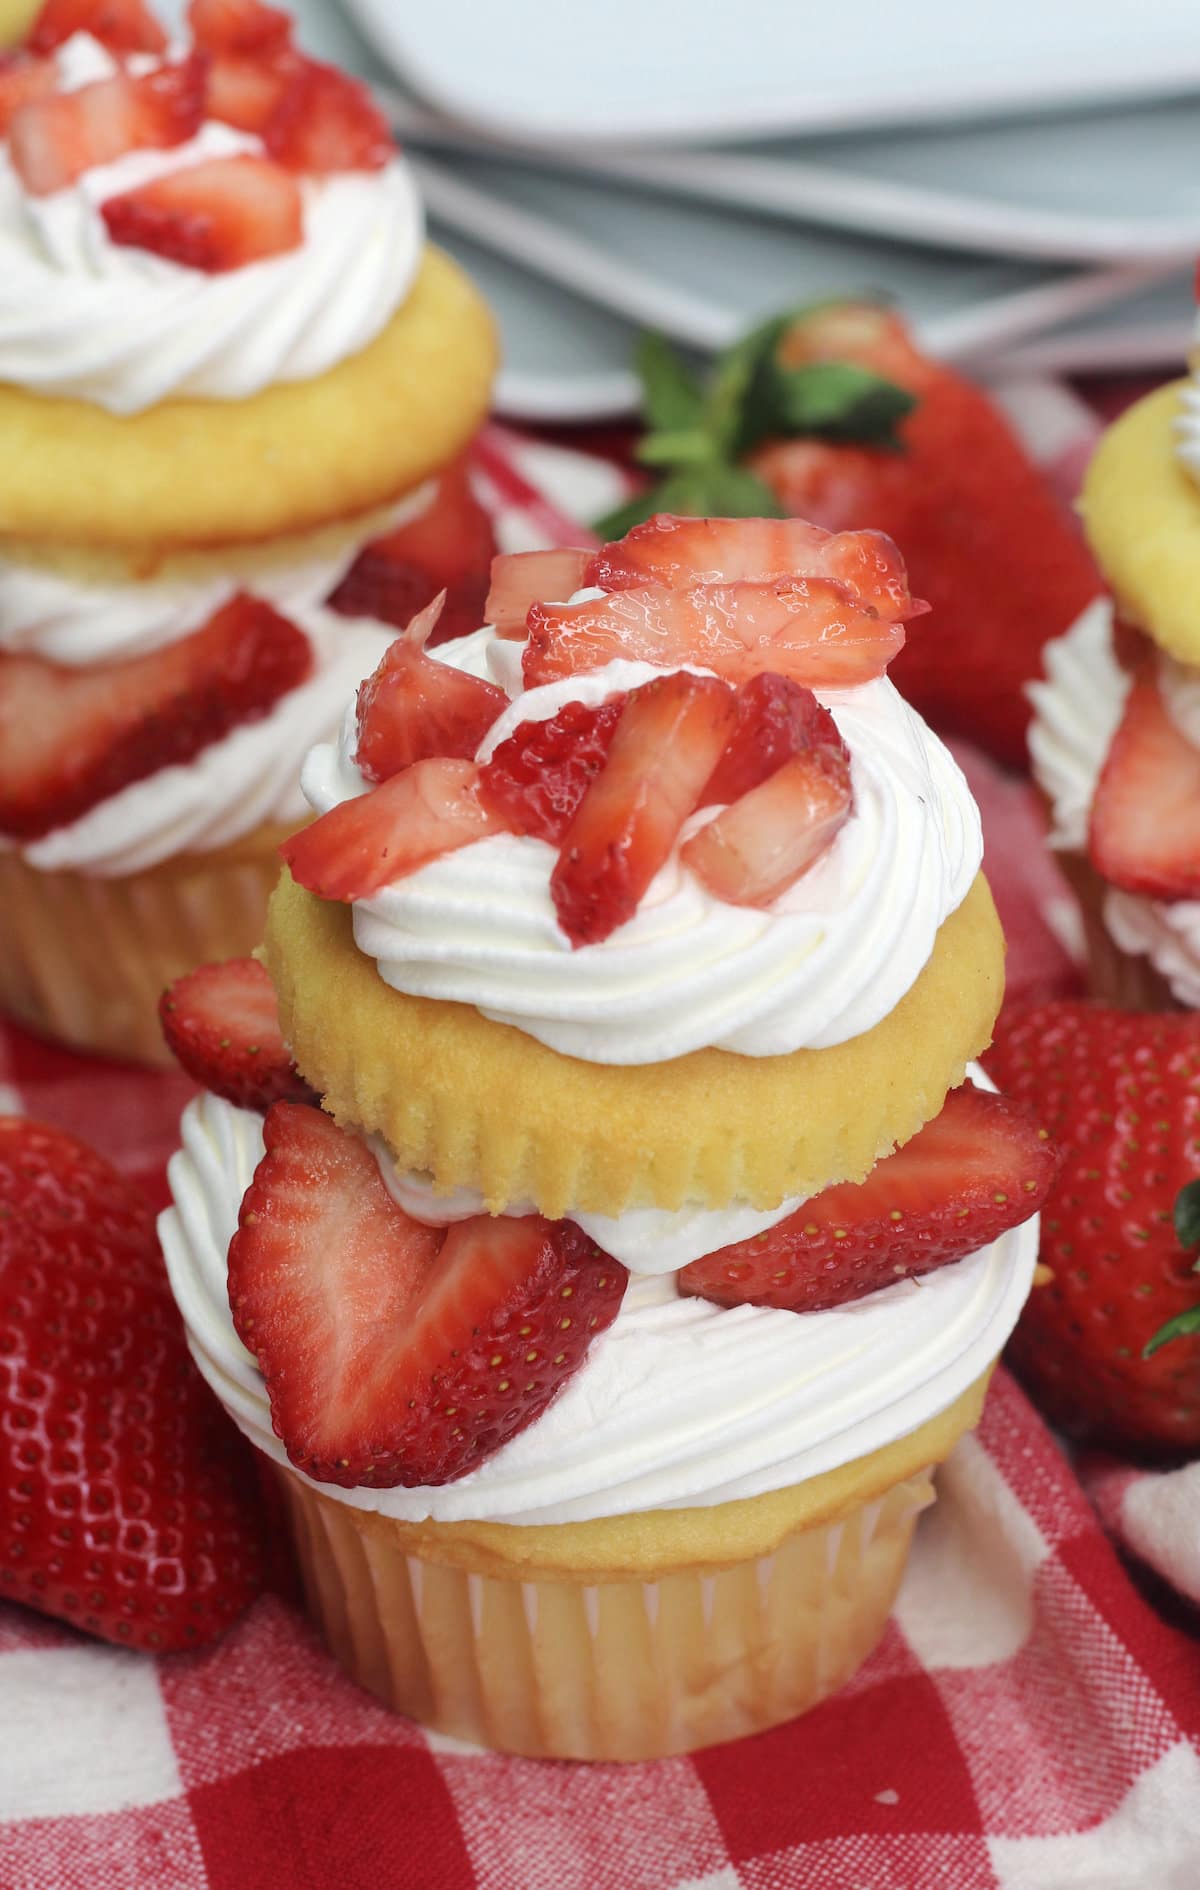 Overhead view of a strawberry shortcake cupcake